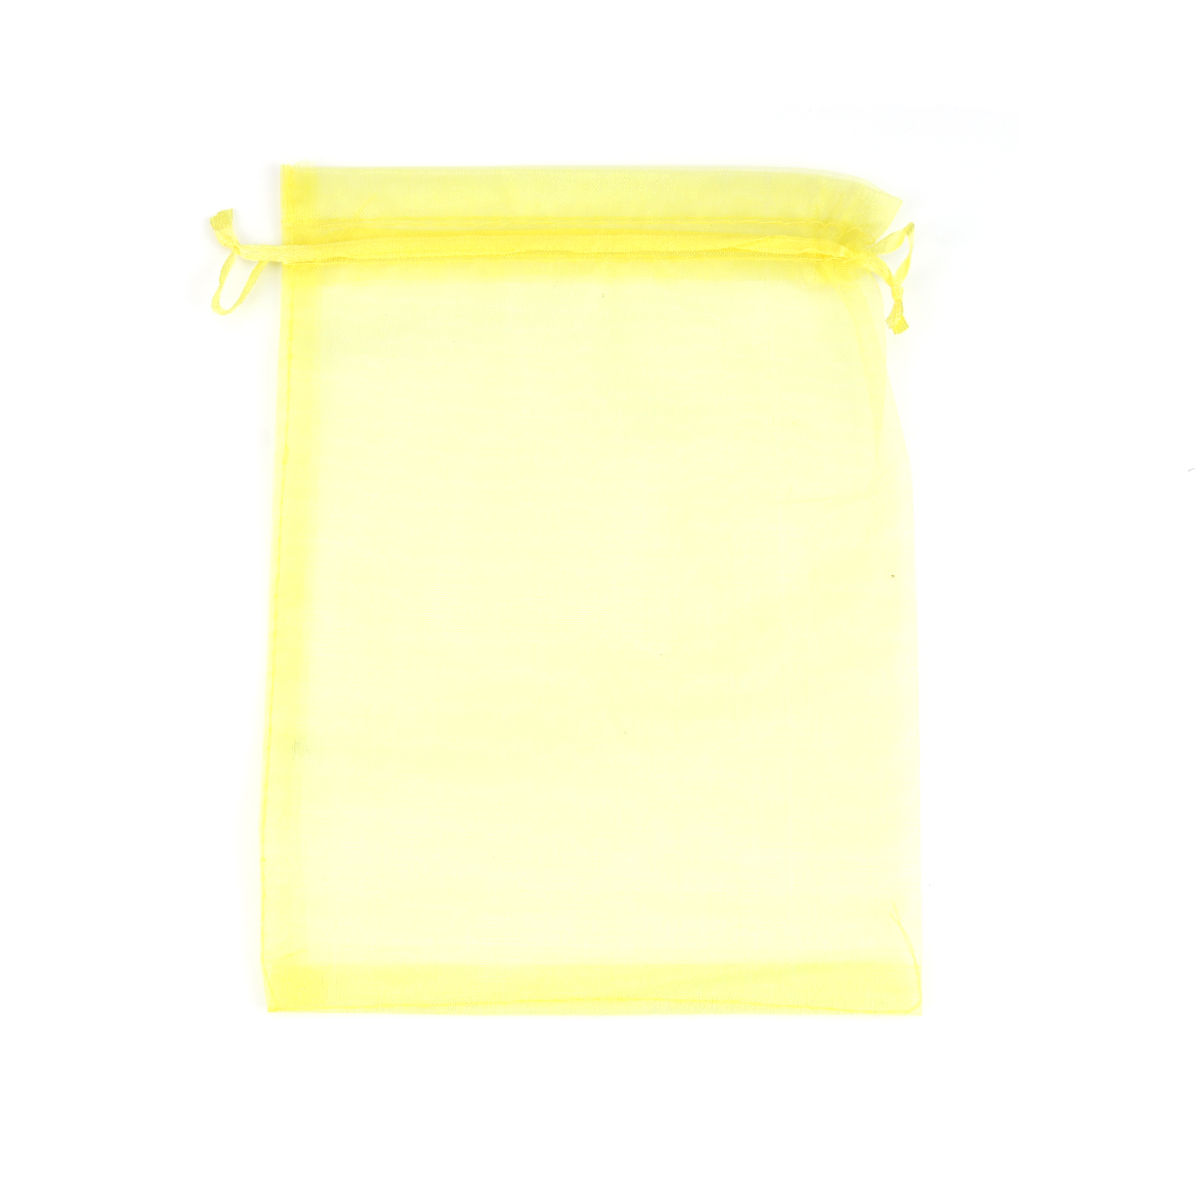 Picture of Wedding Gift Organza Jewelry Bags Drawstring Rectangle Yellow 20cm x15cm(7 7/8" x5 7/8"), (Usable Space: 17x14.5cm) 20 PCs